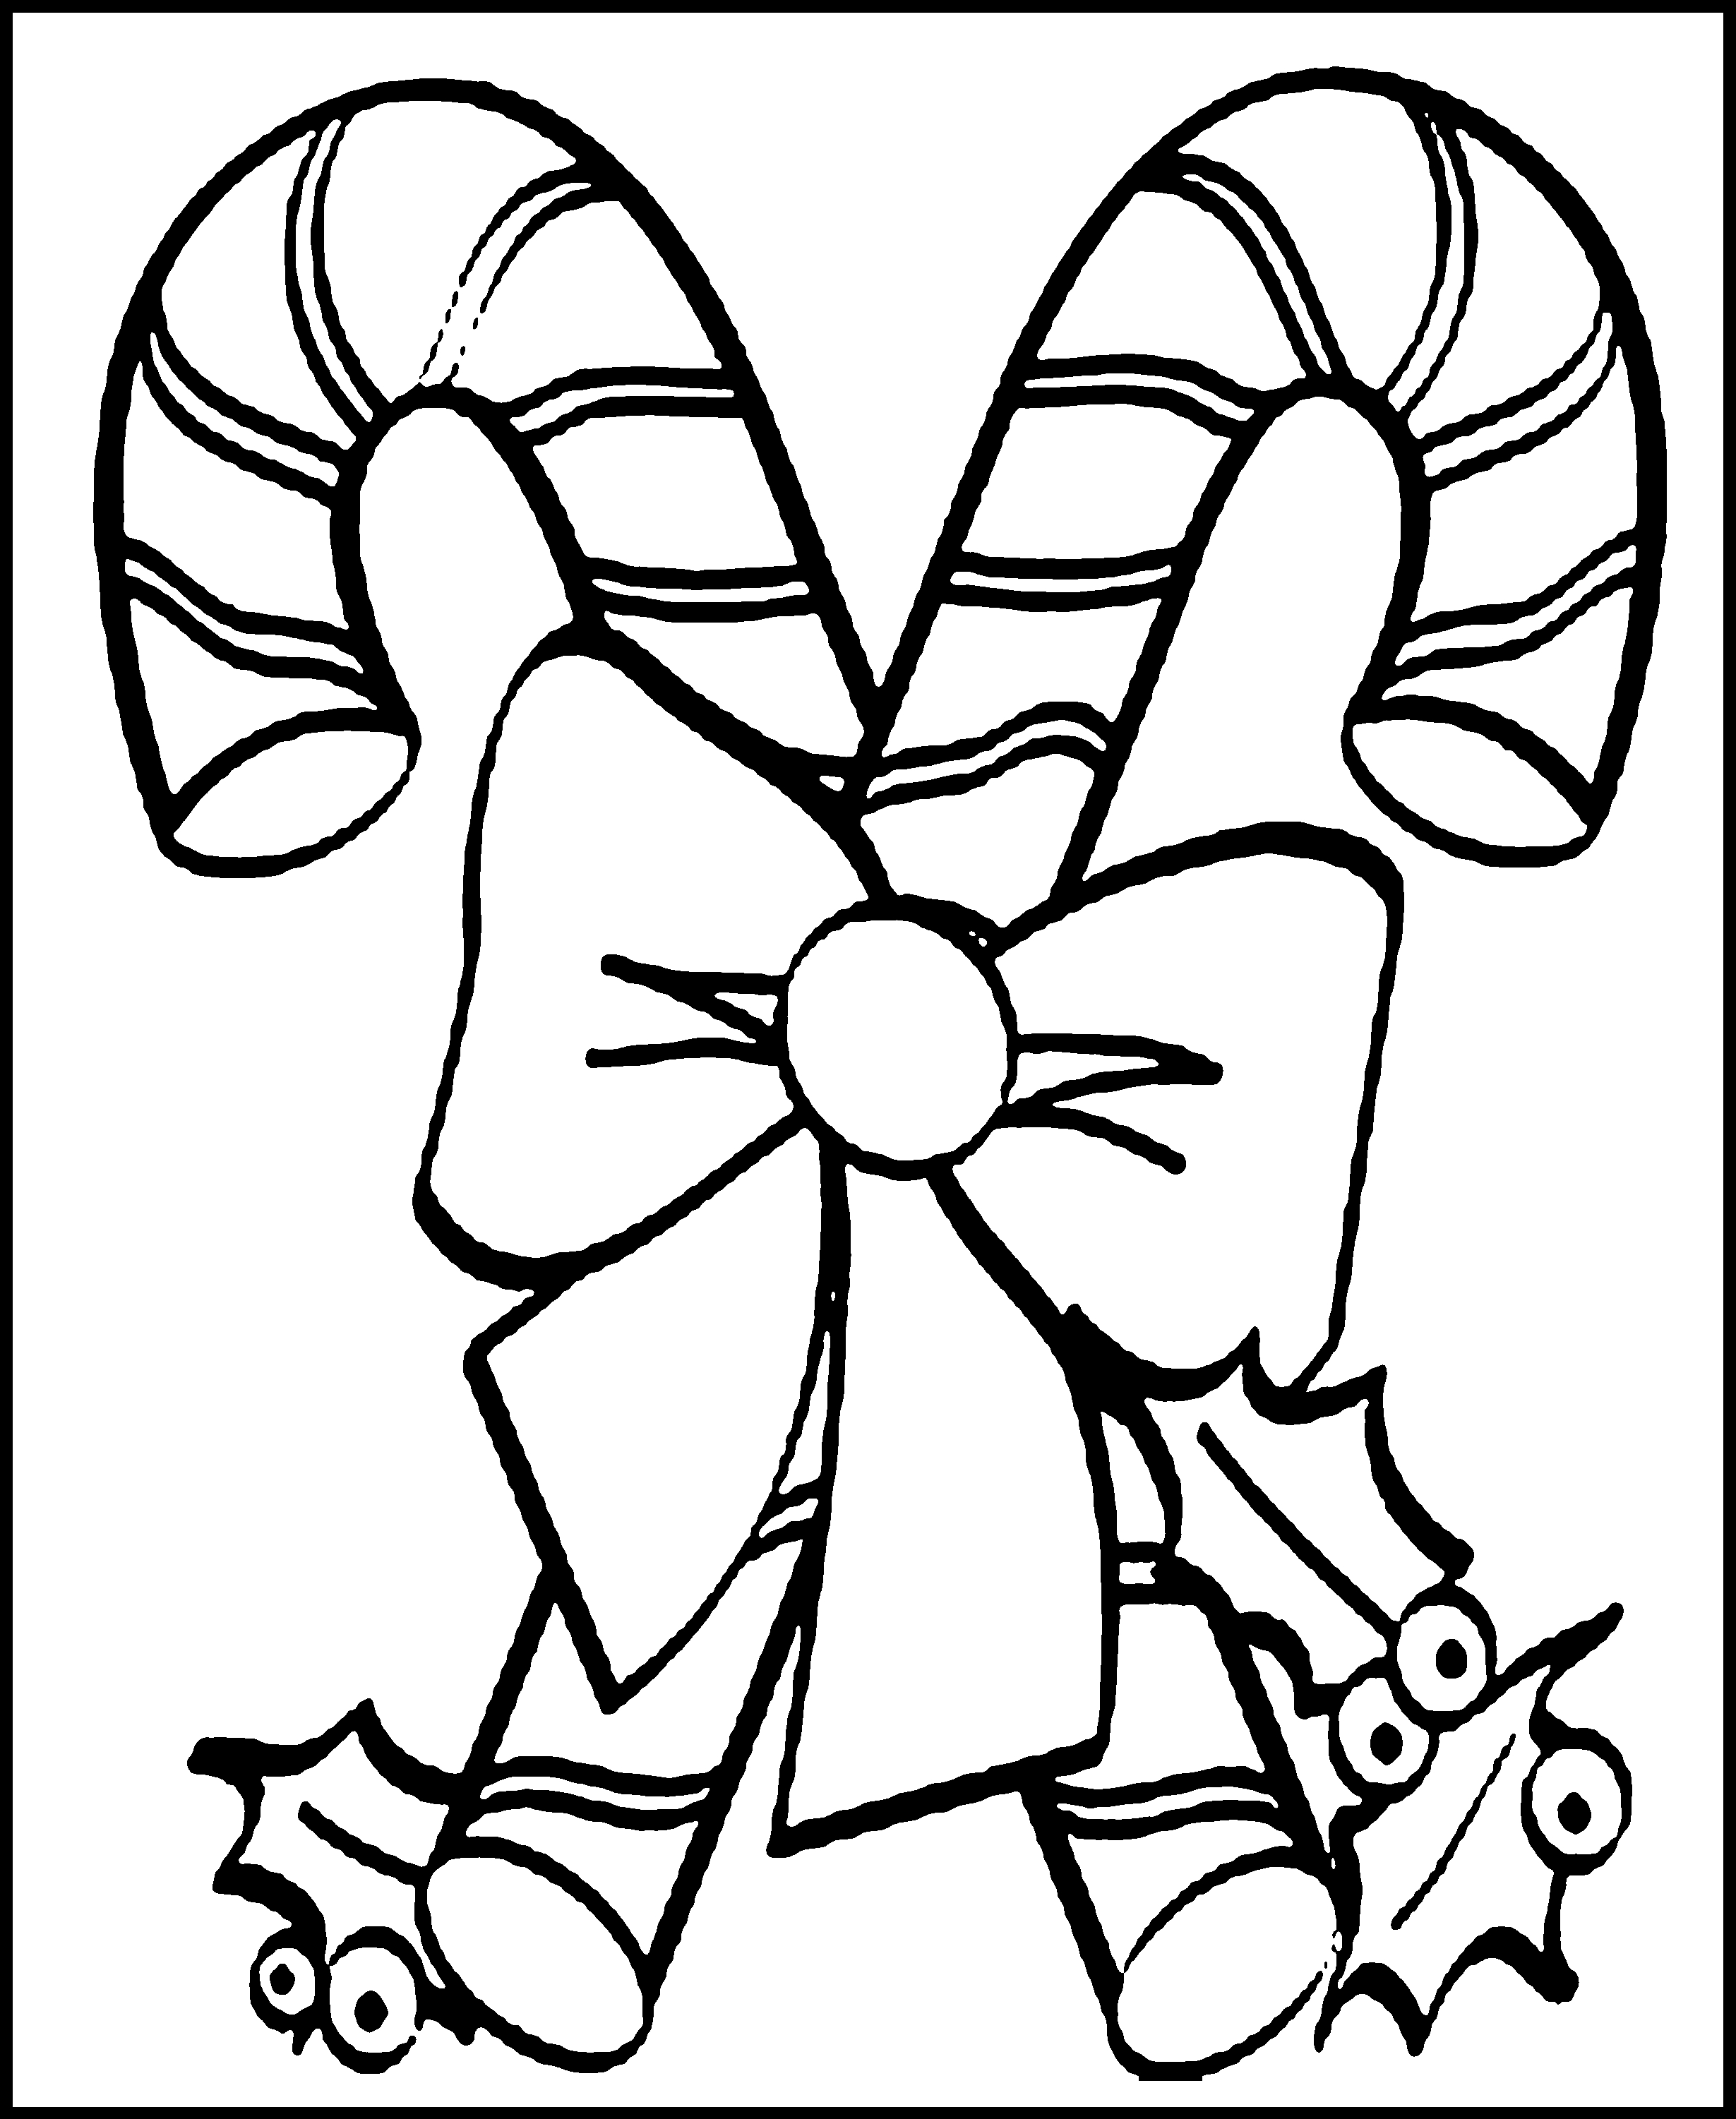 Free Printable Candy Cane Coloring Pages For Kids | Young At Heart - Free Printable Christmas Coloring Pages For Kids